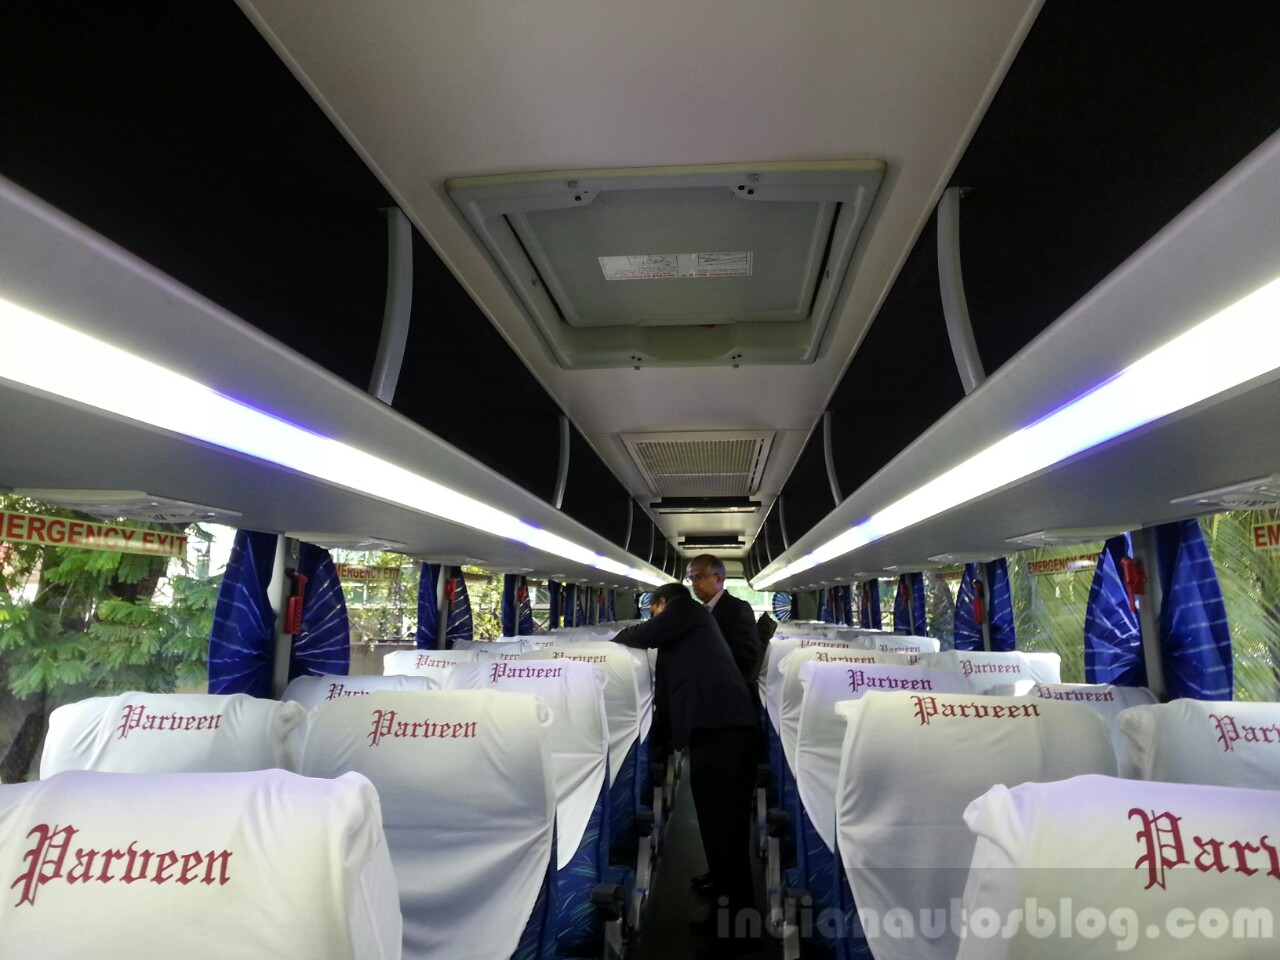 Scania Metrolink Bus Delivered In Chennai To Parveen